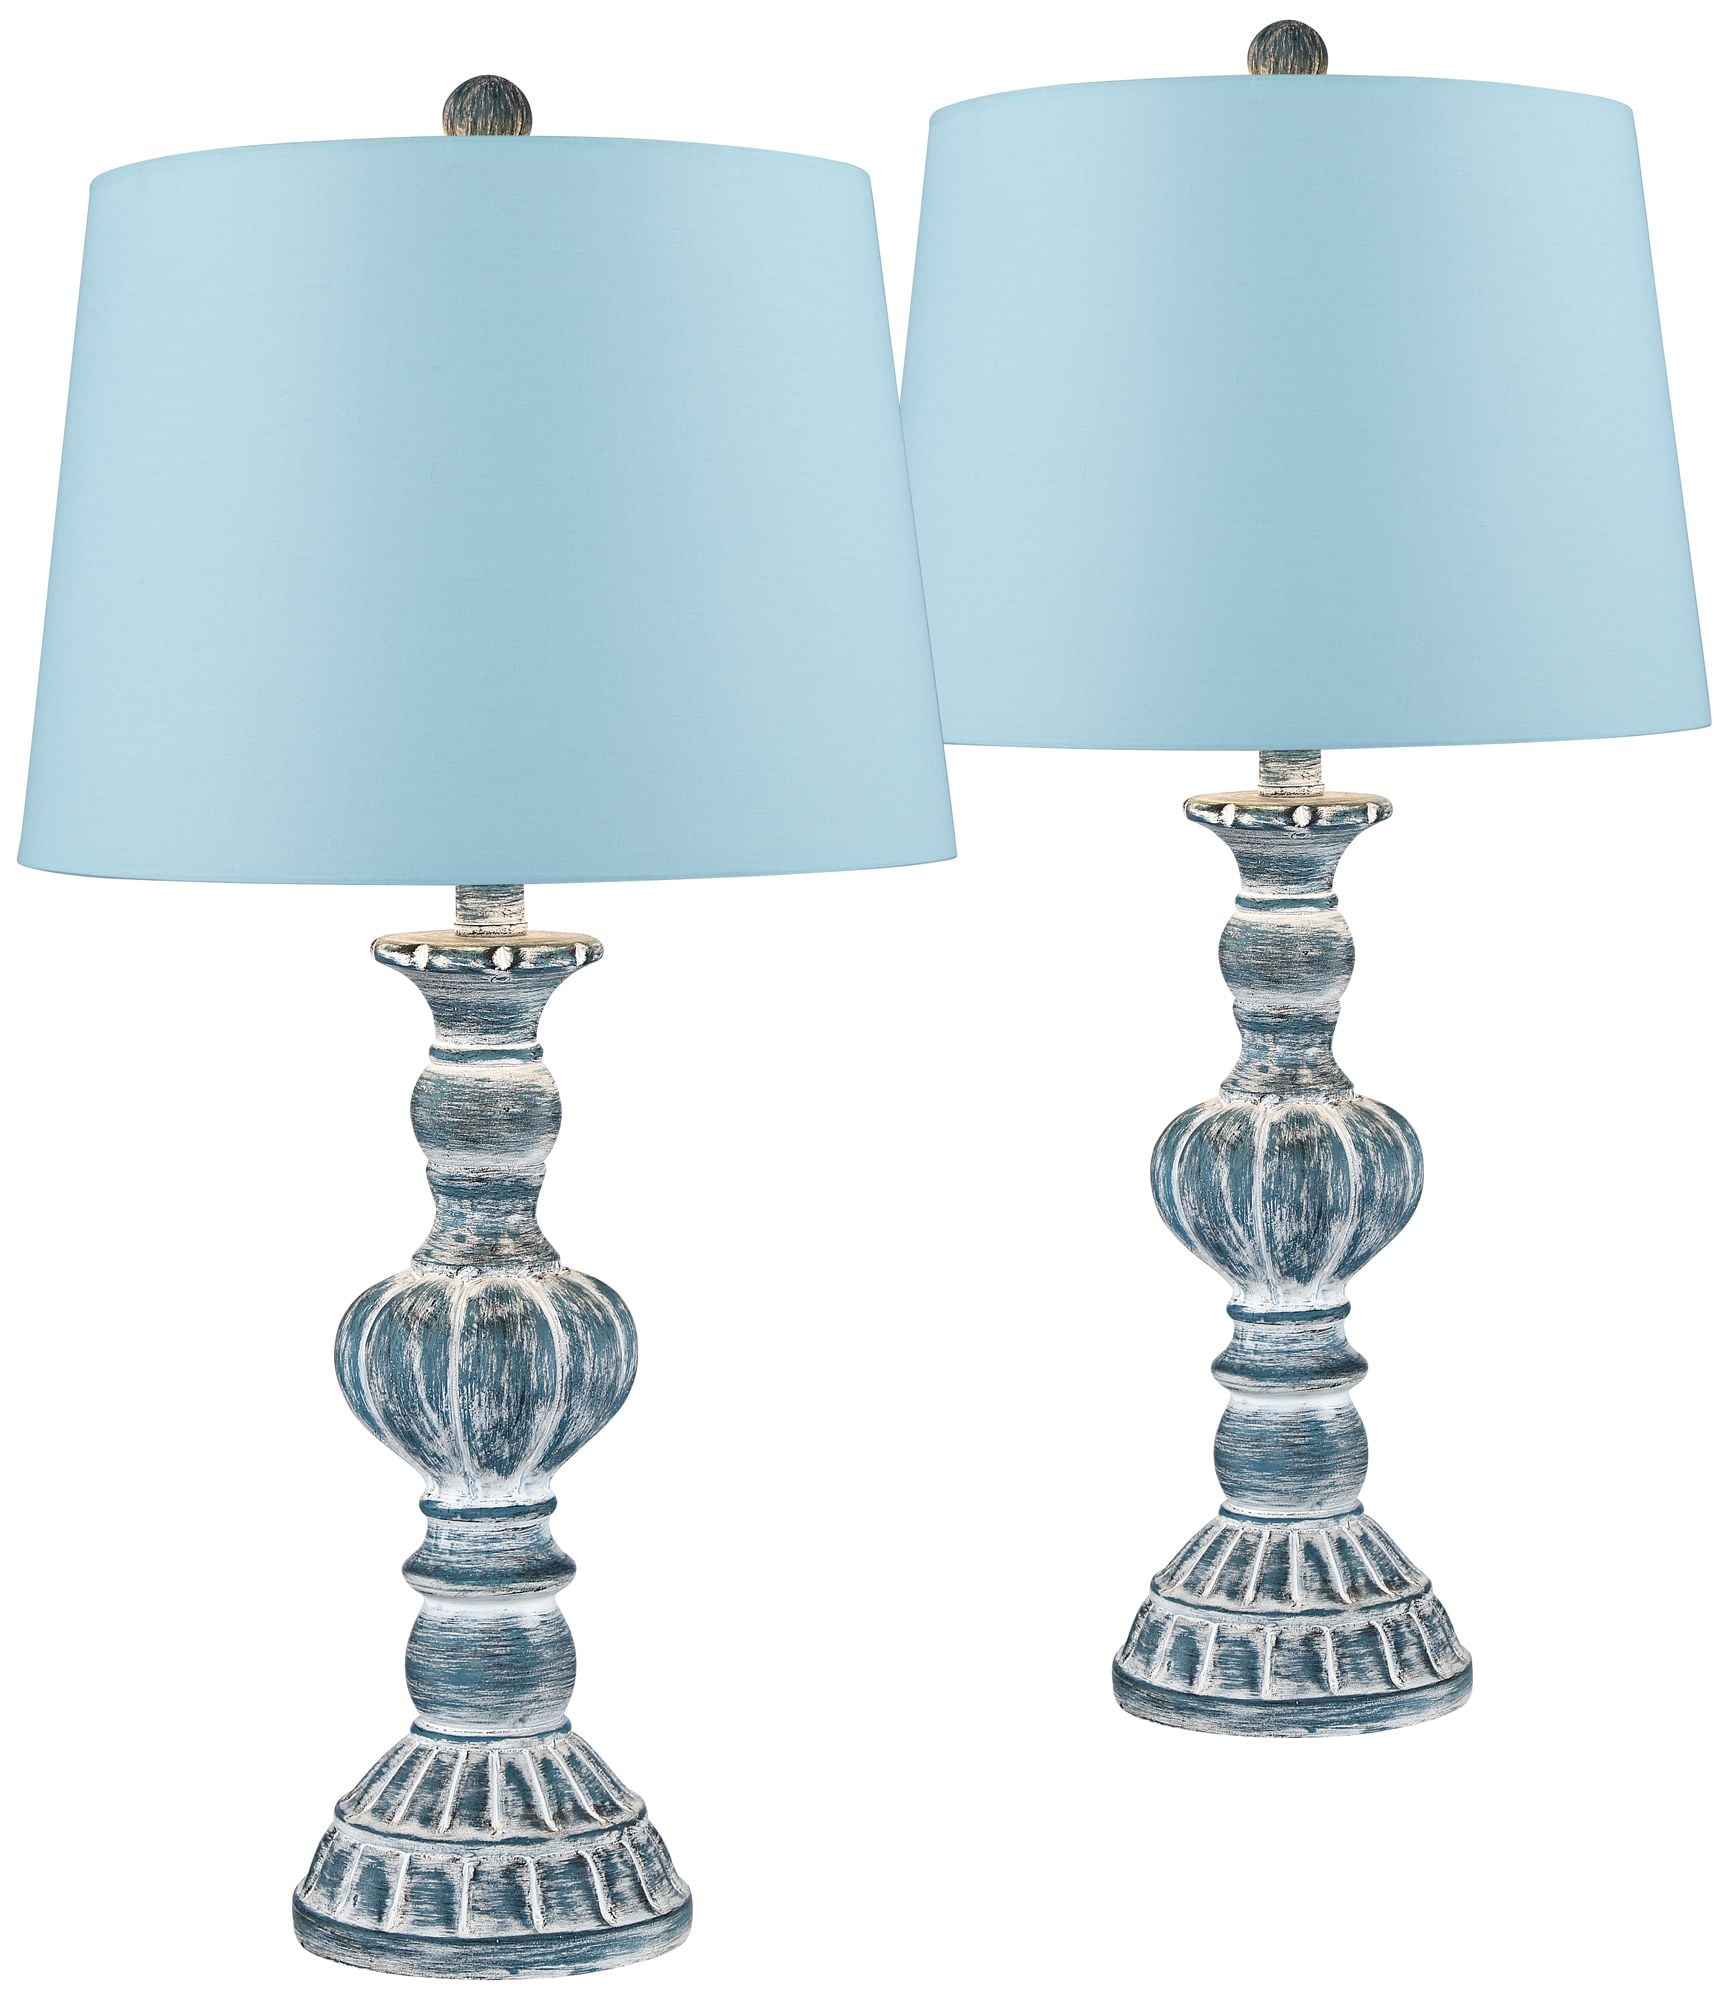 Regency Hill Country Cottage Table Lamps Set Of Blue Wash Fabric